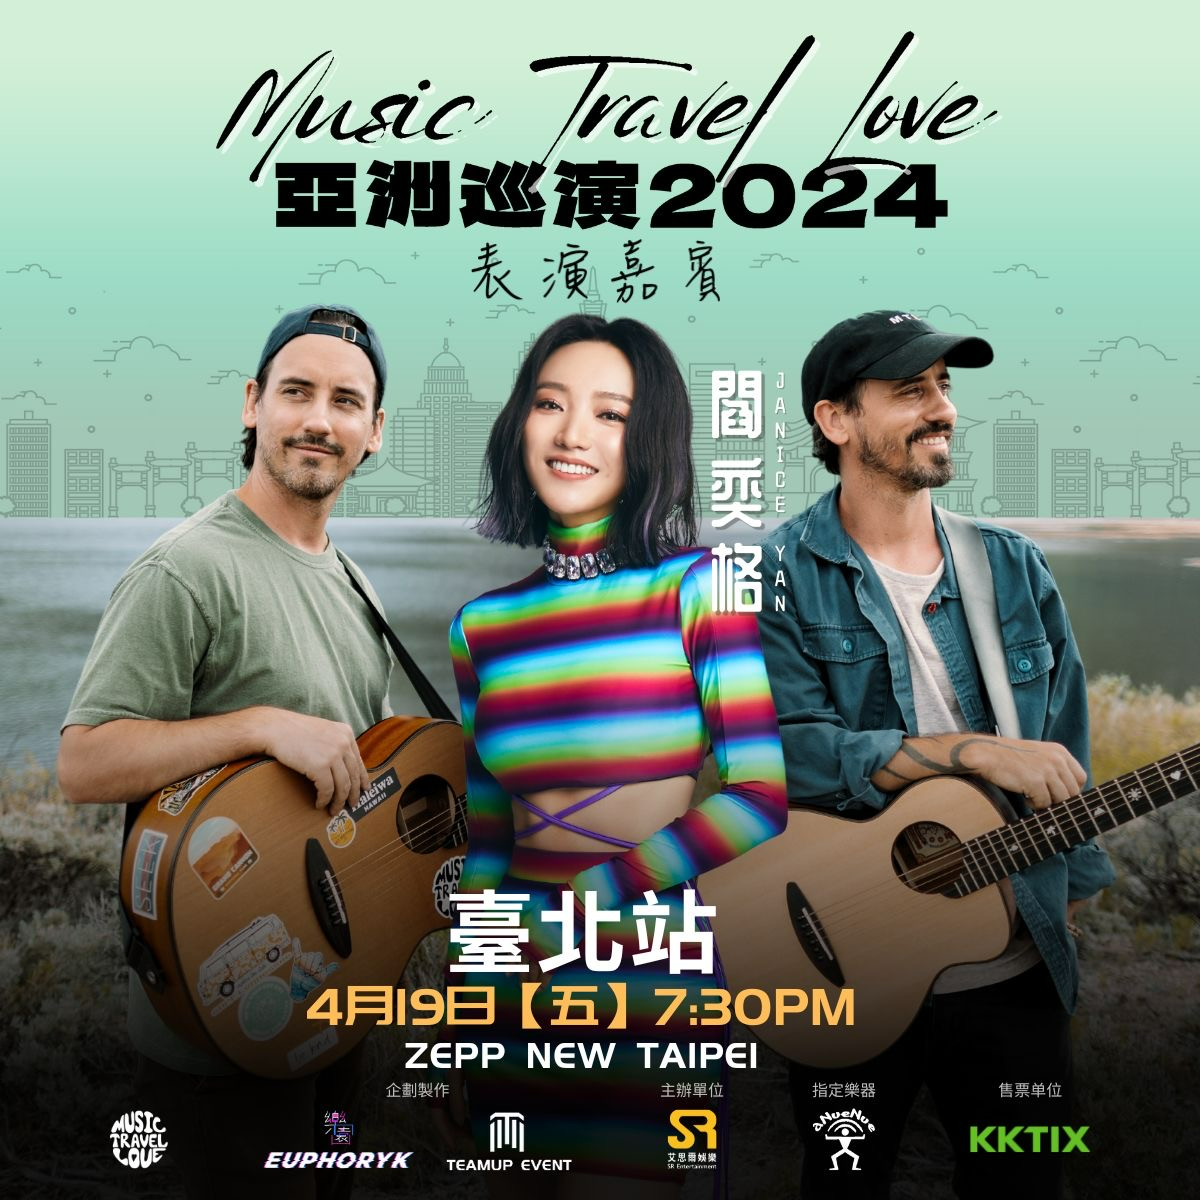 MUSIC TRAVEL LOVE│MUSIC TRAVEL LOVE《COVERING THE WORLD》台北場